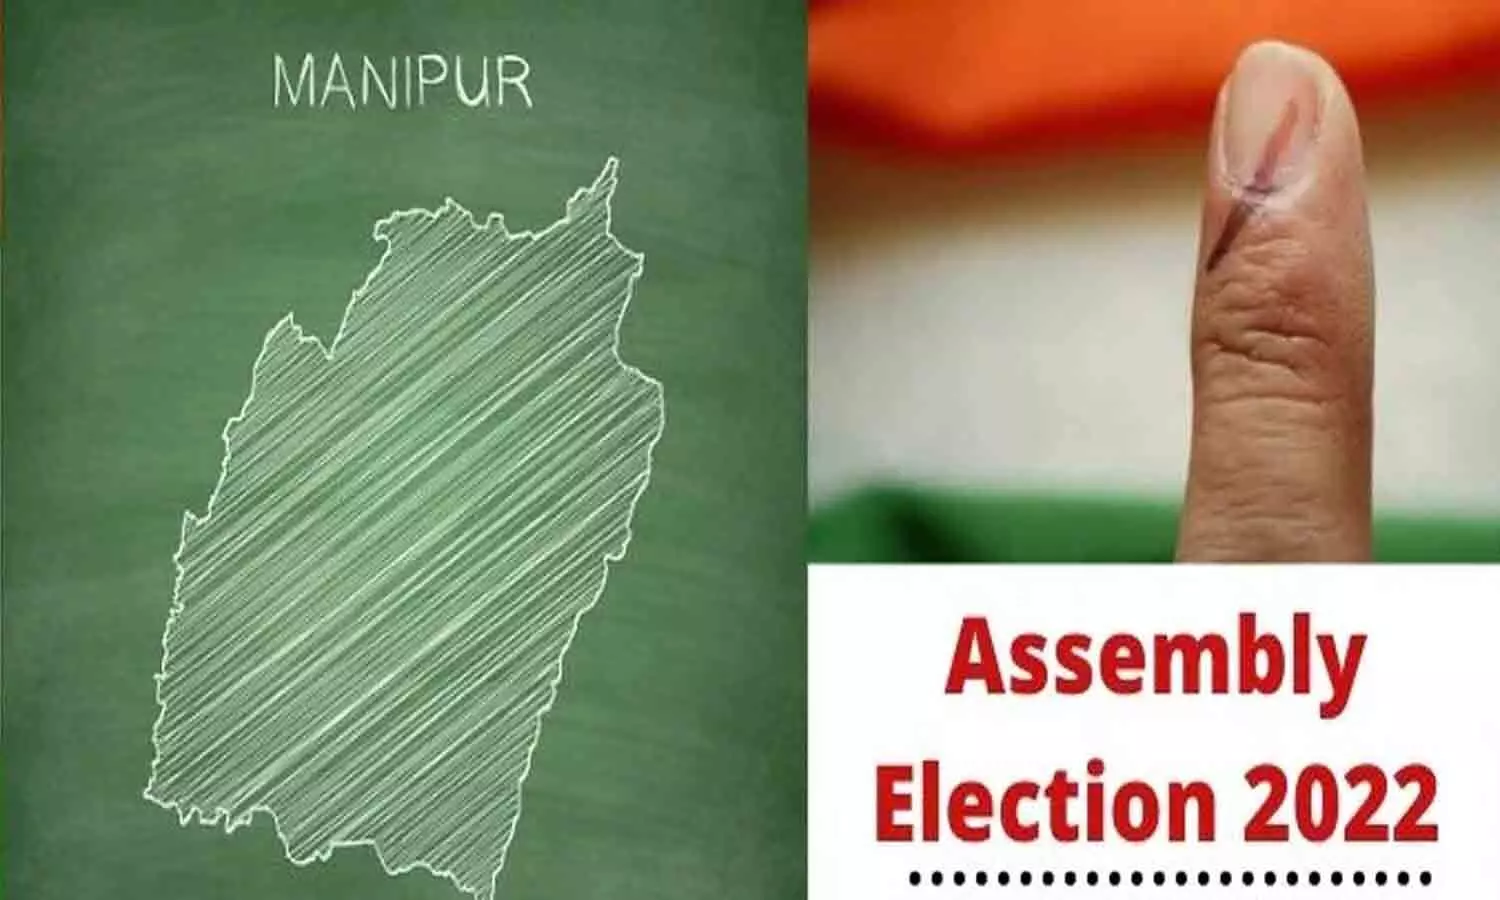 Manipur Election 2022: Last phase of voting in Manipur, 22 seats - 92 candidates